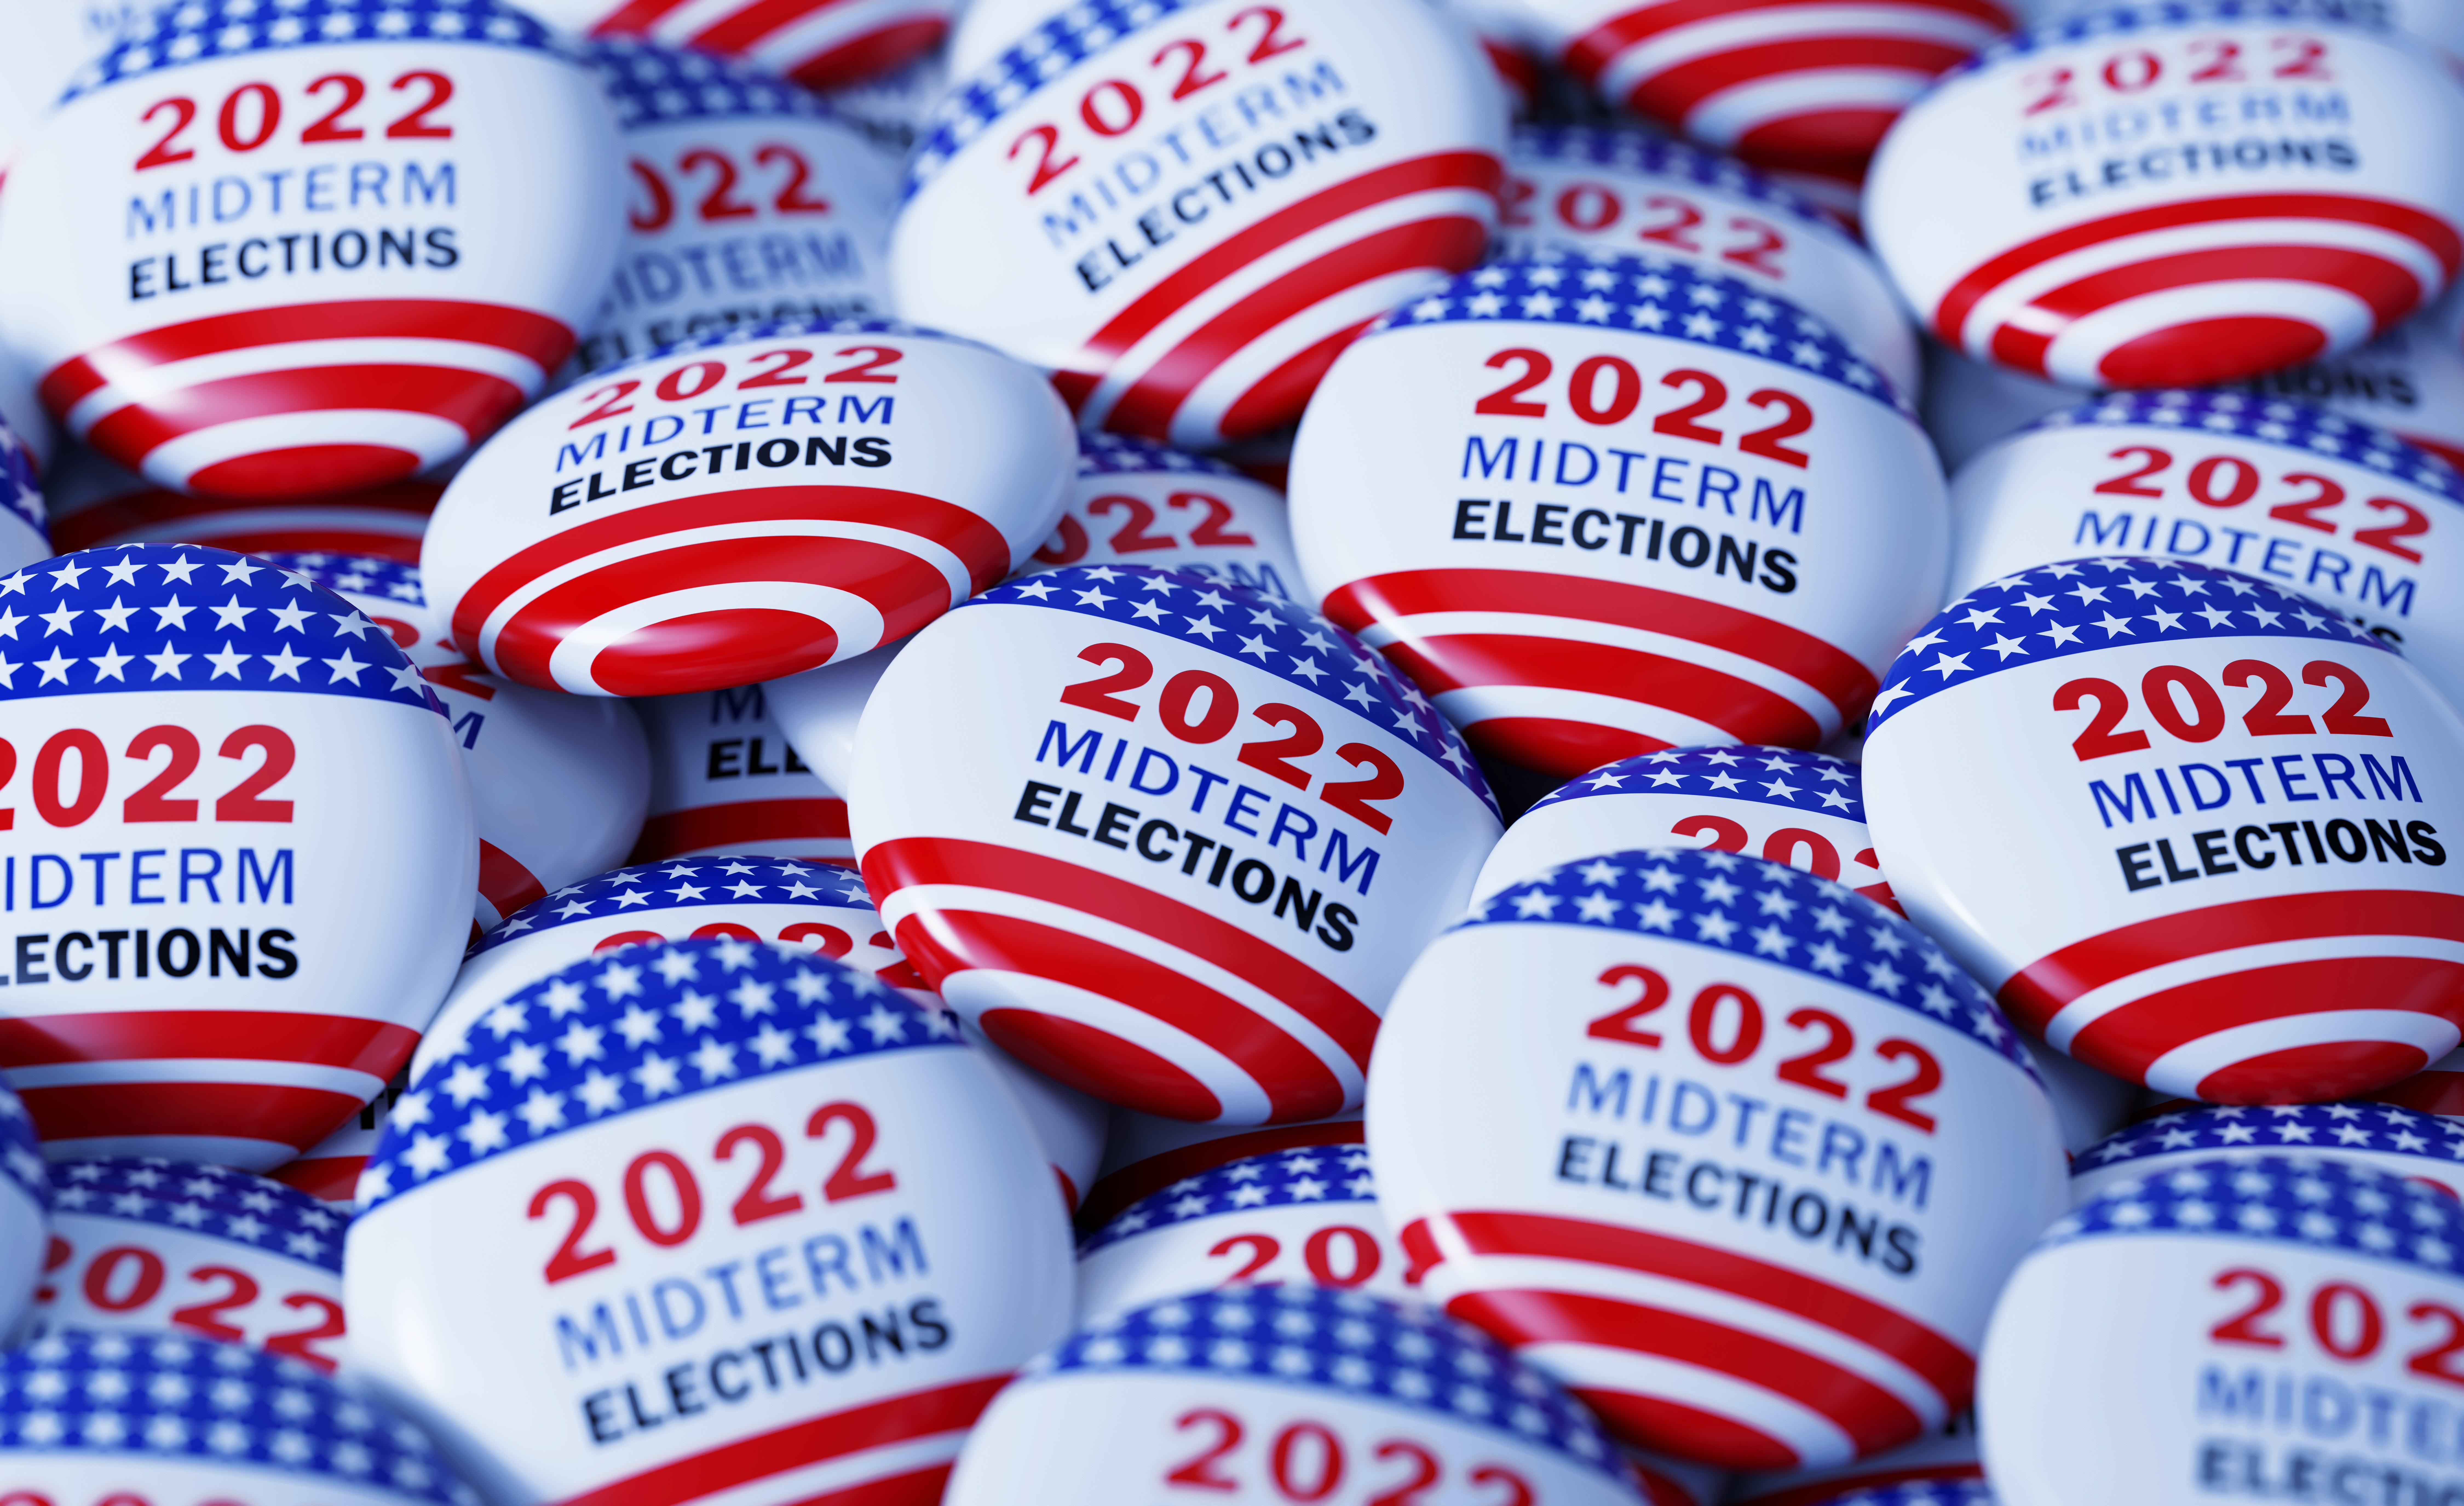 Cannabis and the 2022 Midterms: A Mixed Bag